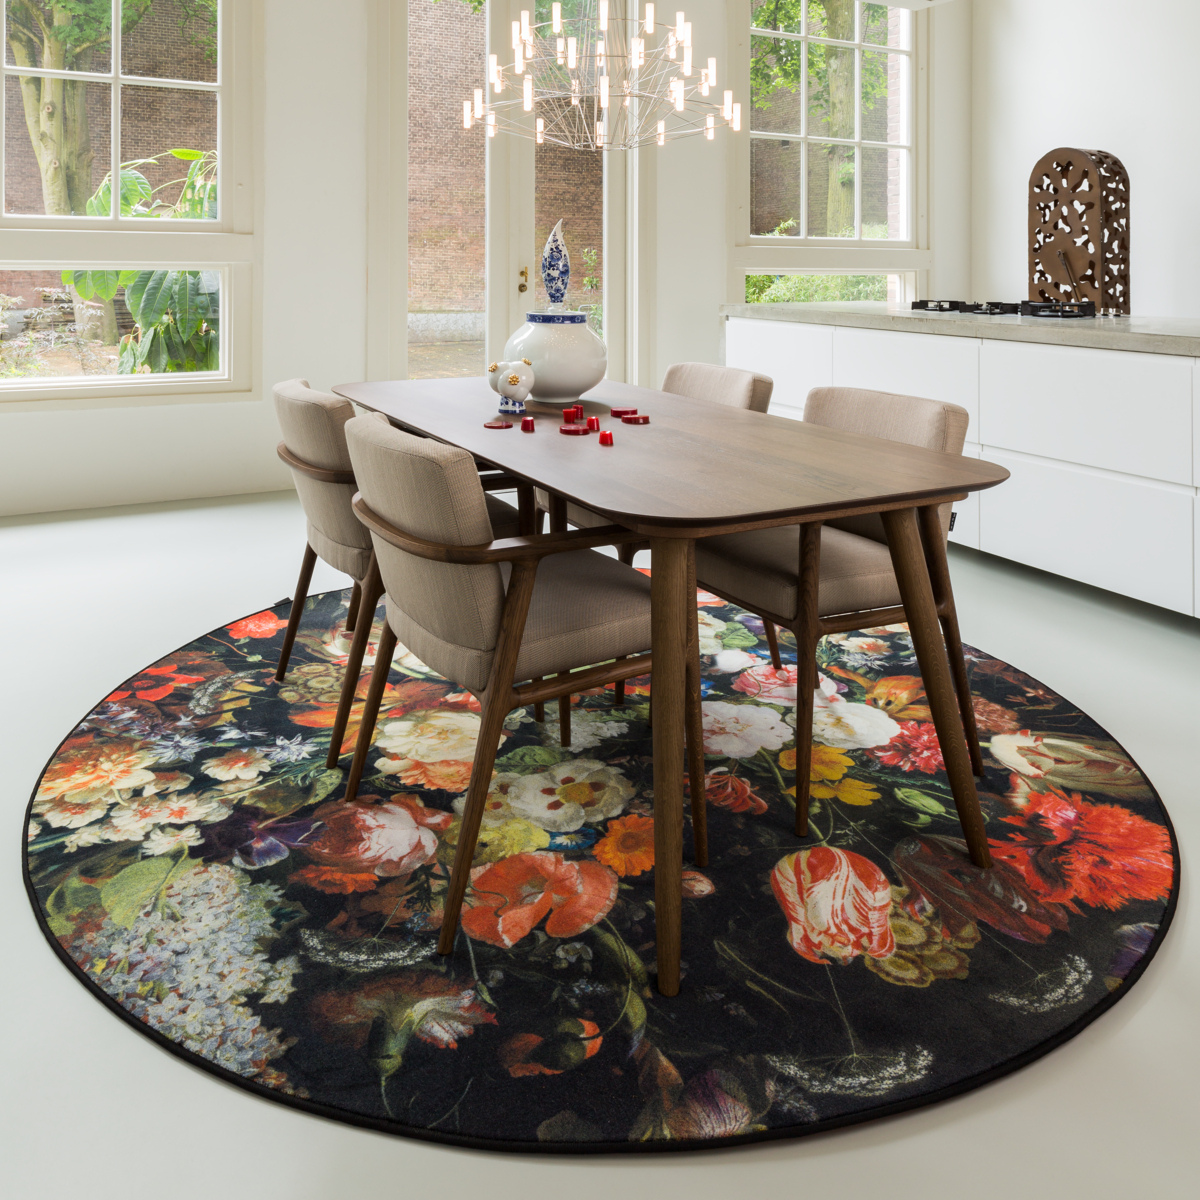 Picturesque circular floral rug in dining room with chandelier